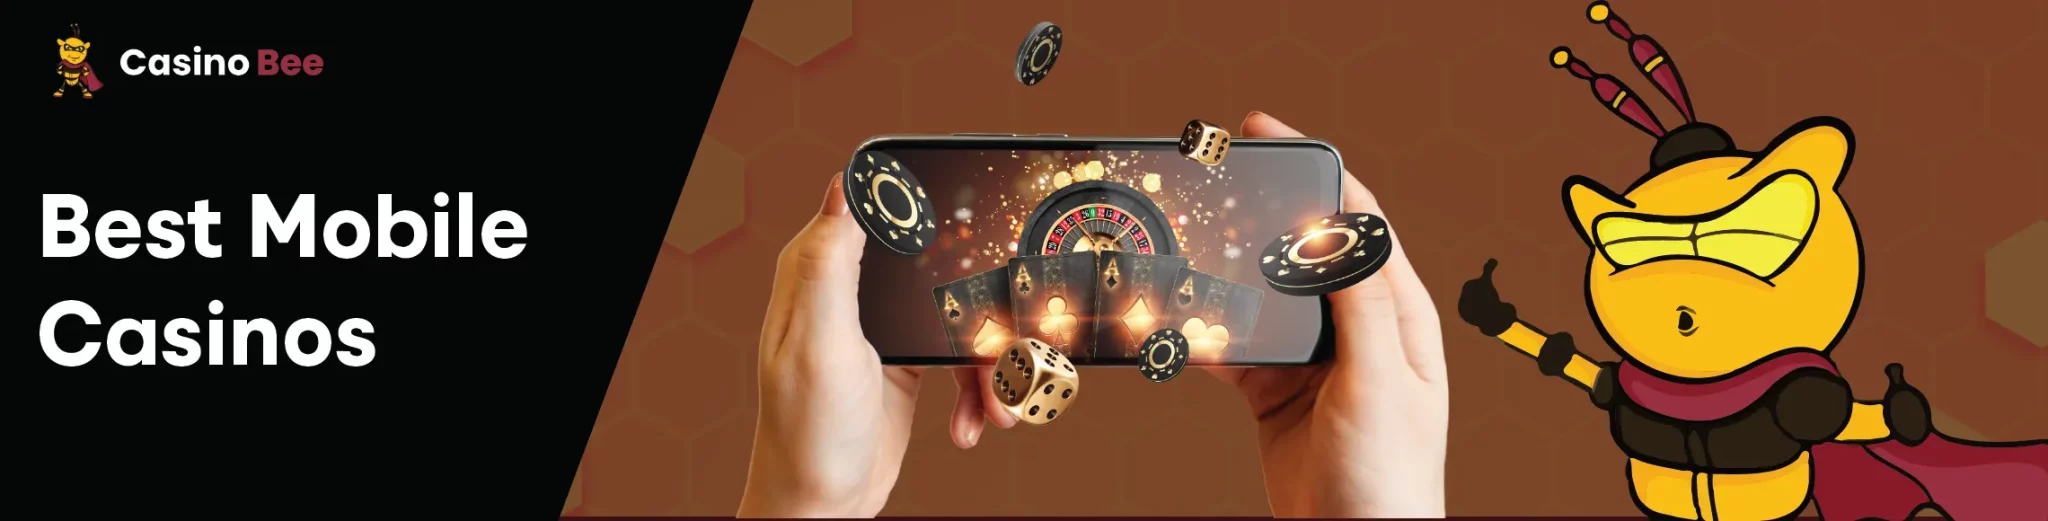 Experience the Best Mobile Casinos